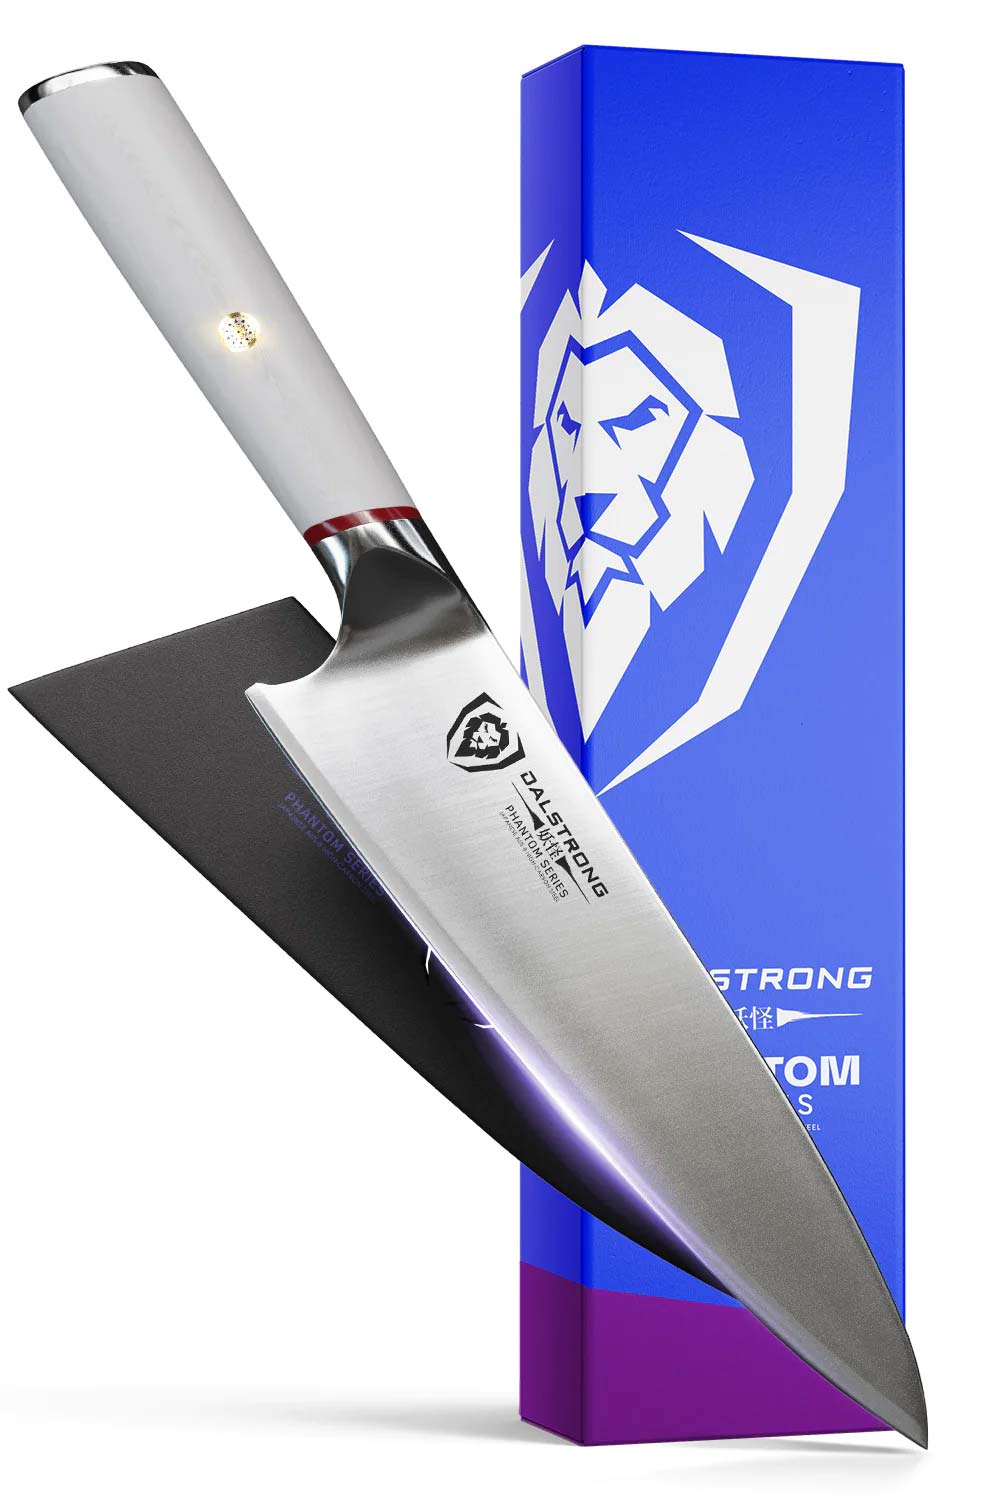 Dalstrong phantom series 8 inch chef knife with white handle in front of it's premium packaging.